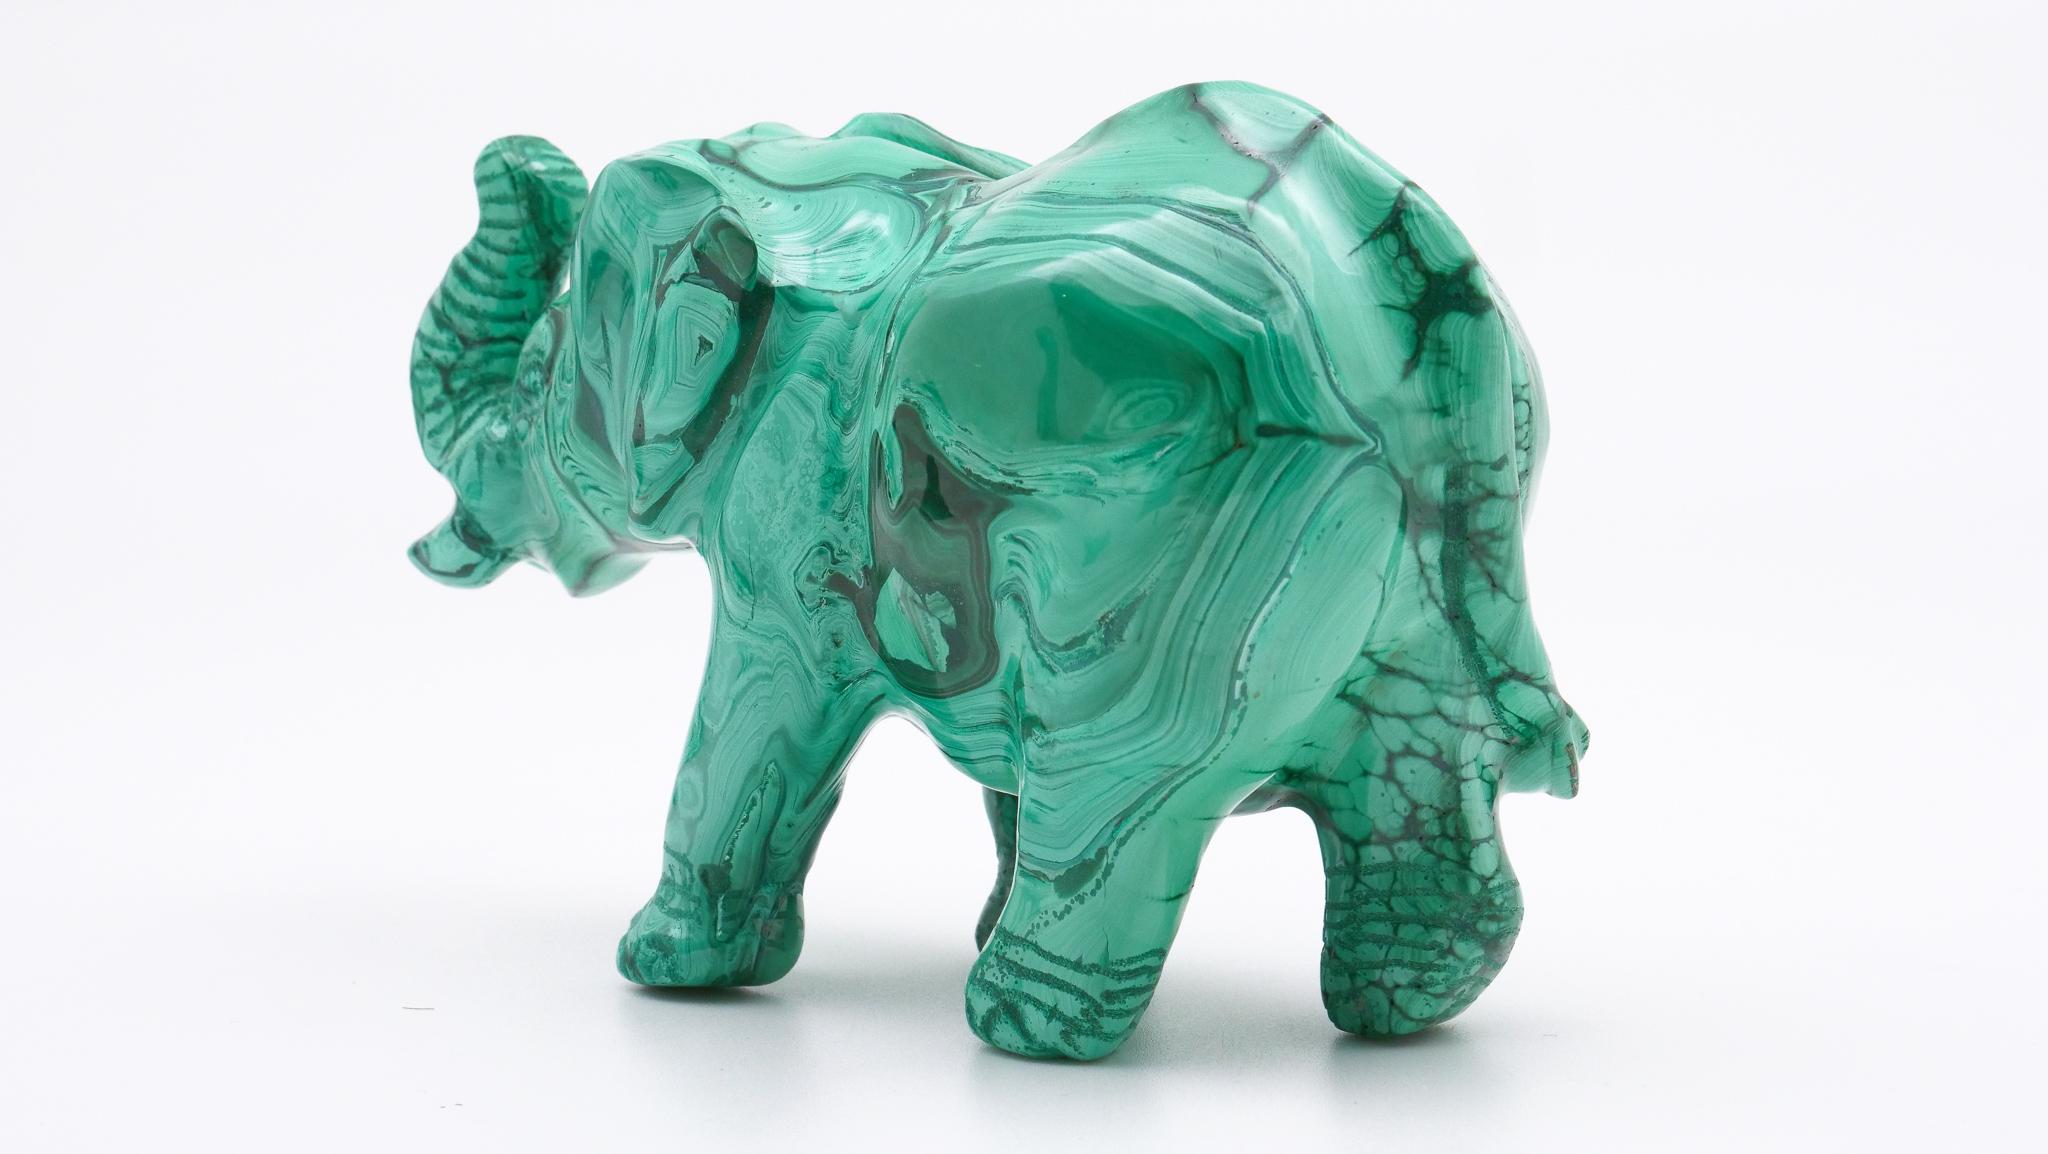 The malachite for this carving was sourced from the Congo where the finest quality of this mineral is currently found. Malachite from the 18th- 19th century was also sourced from Russia. Carvings, such as this, were typically brought back from